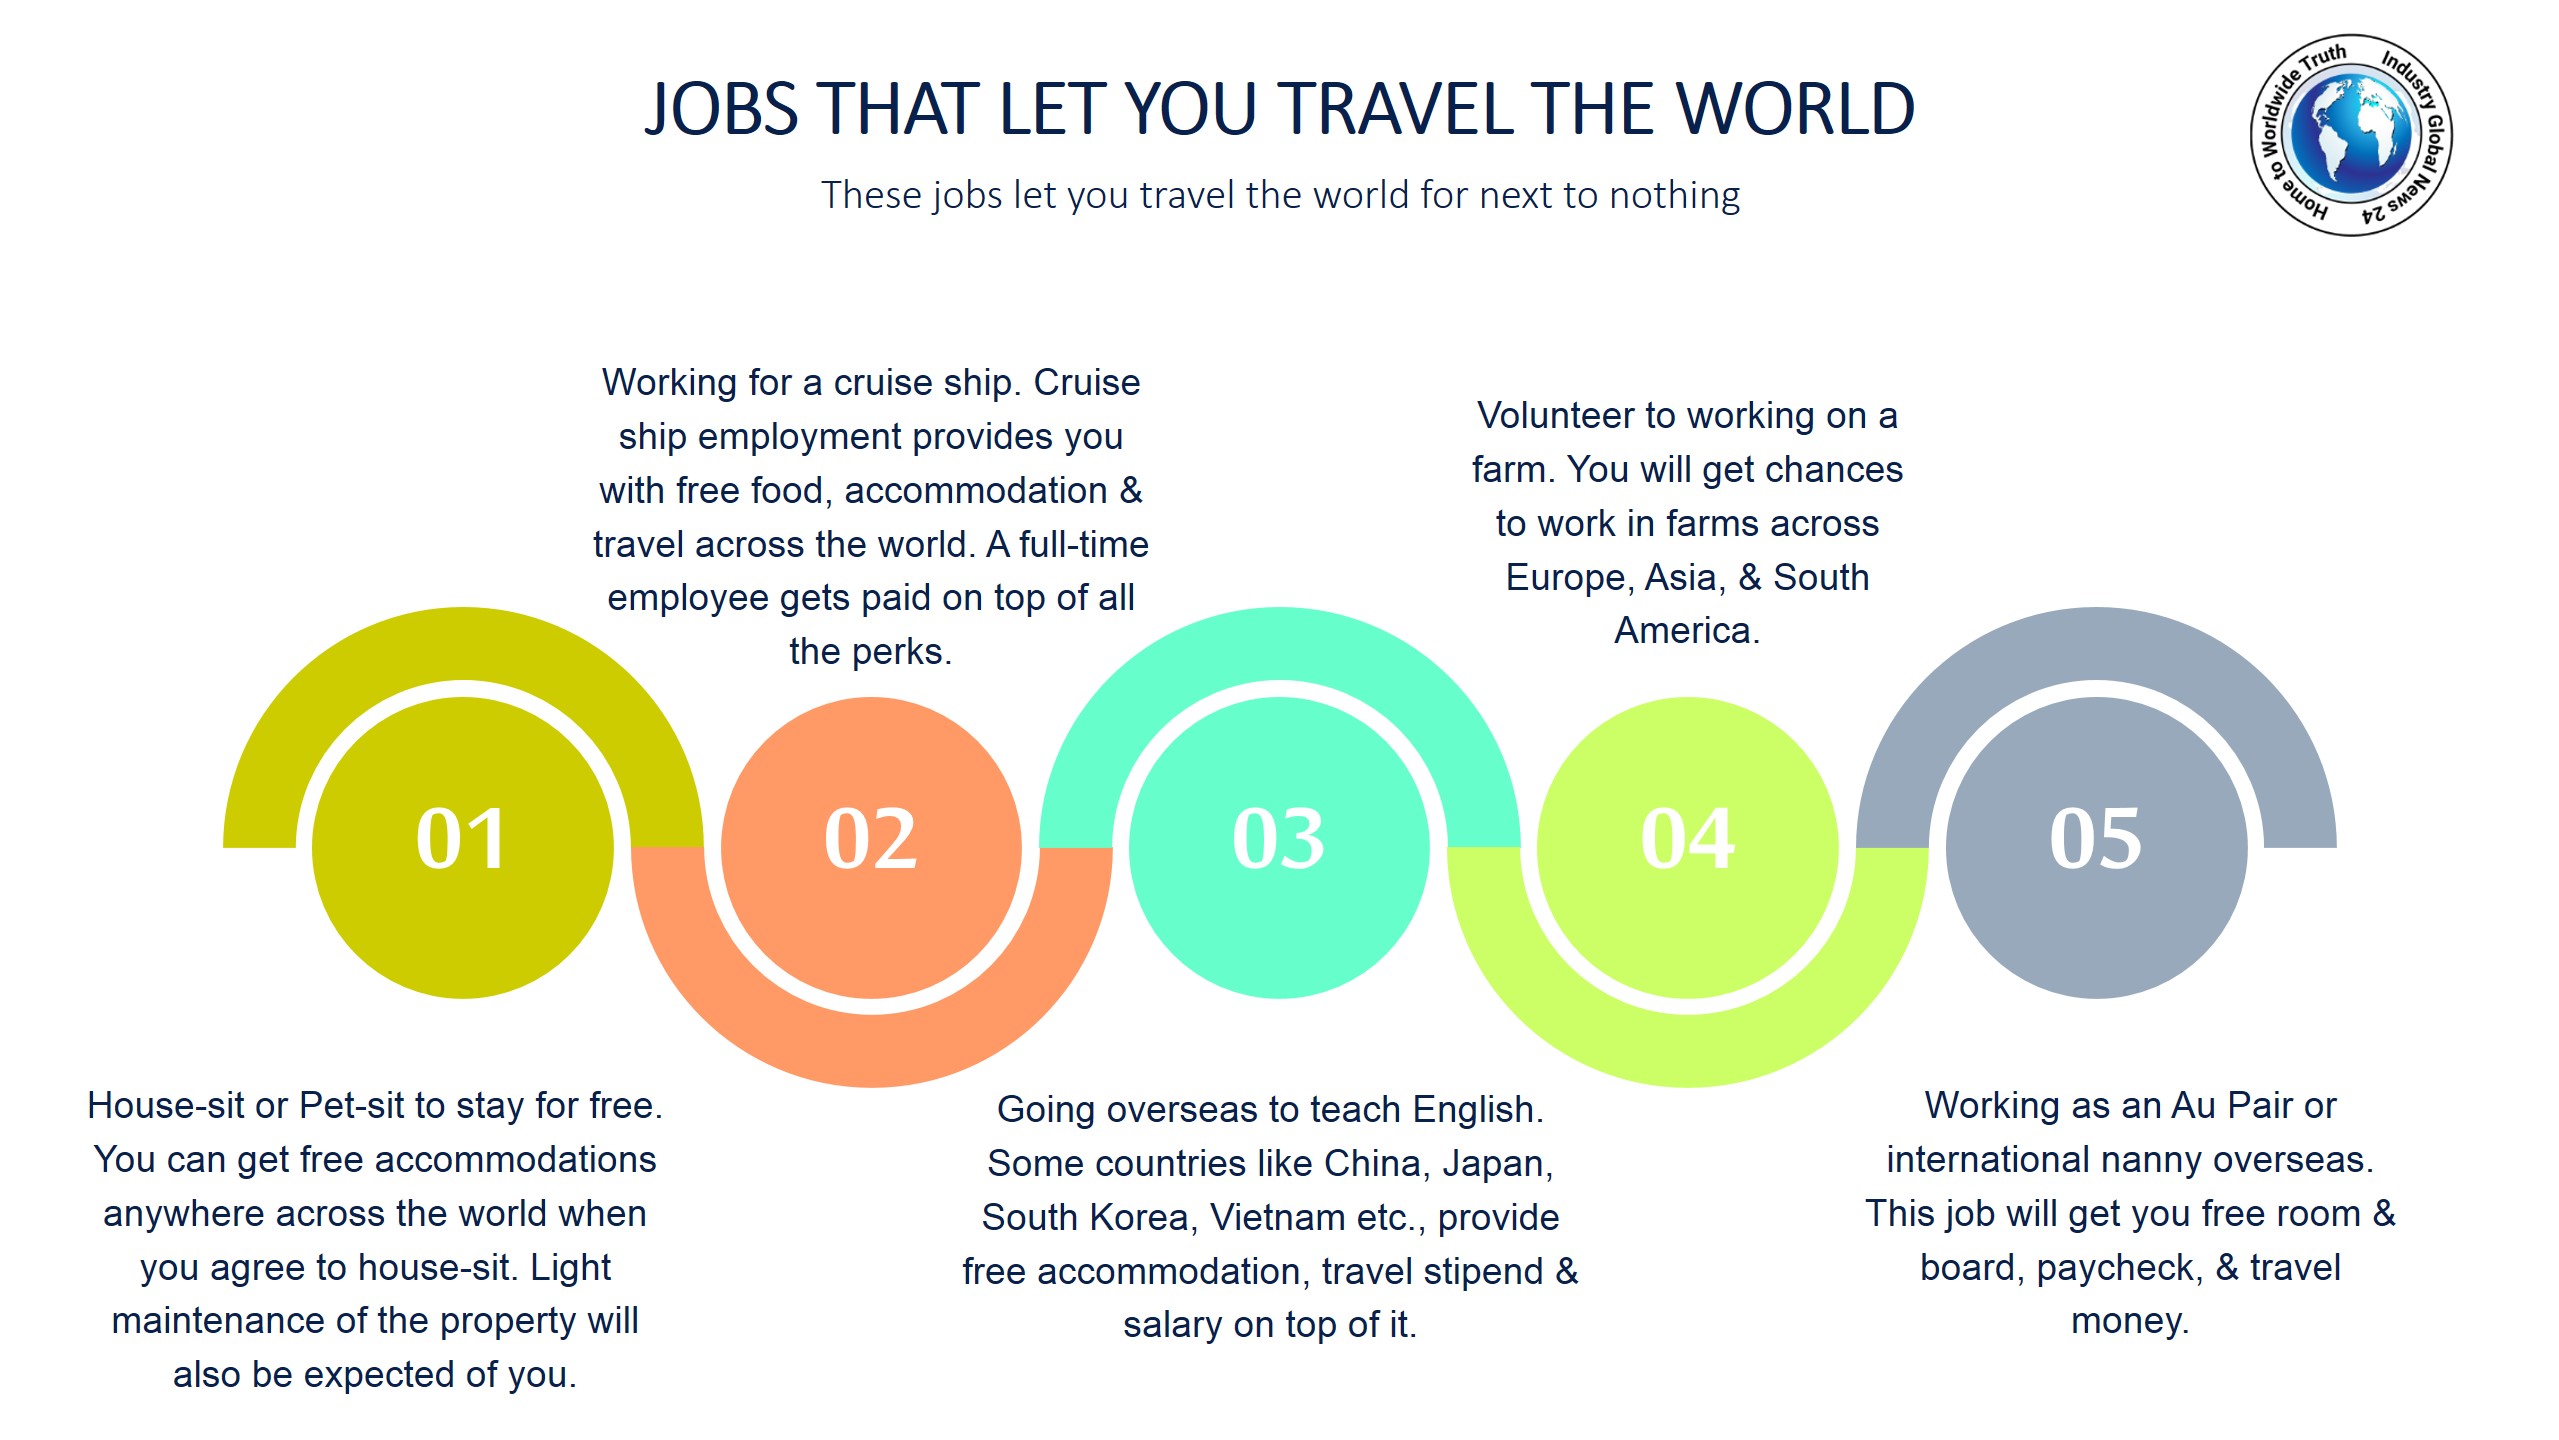 Jobs that let you travel the world